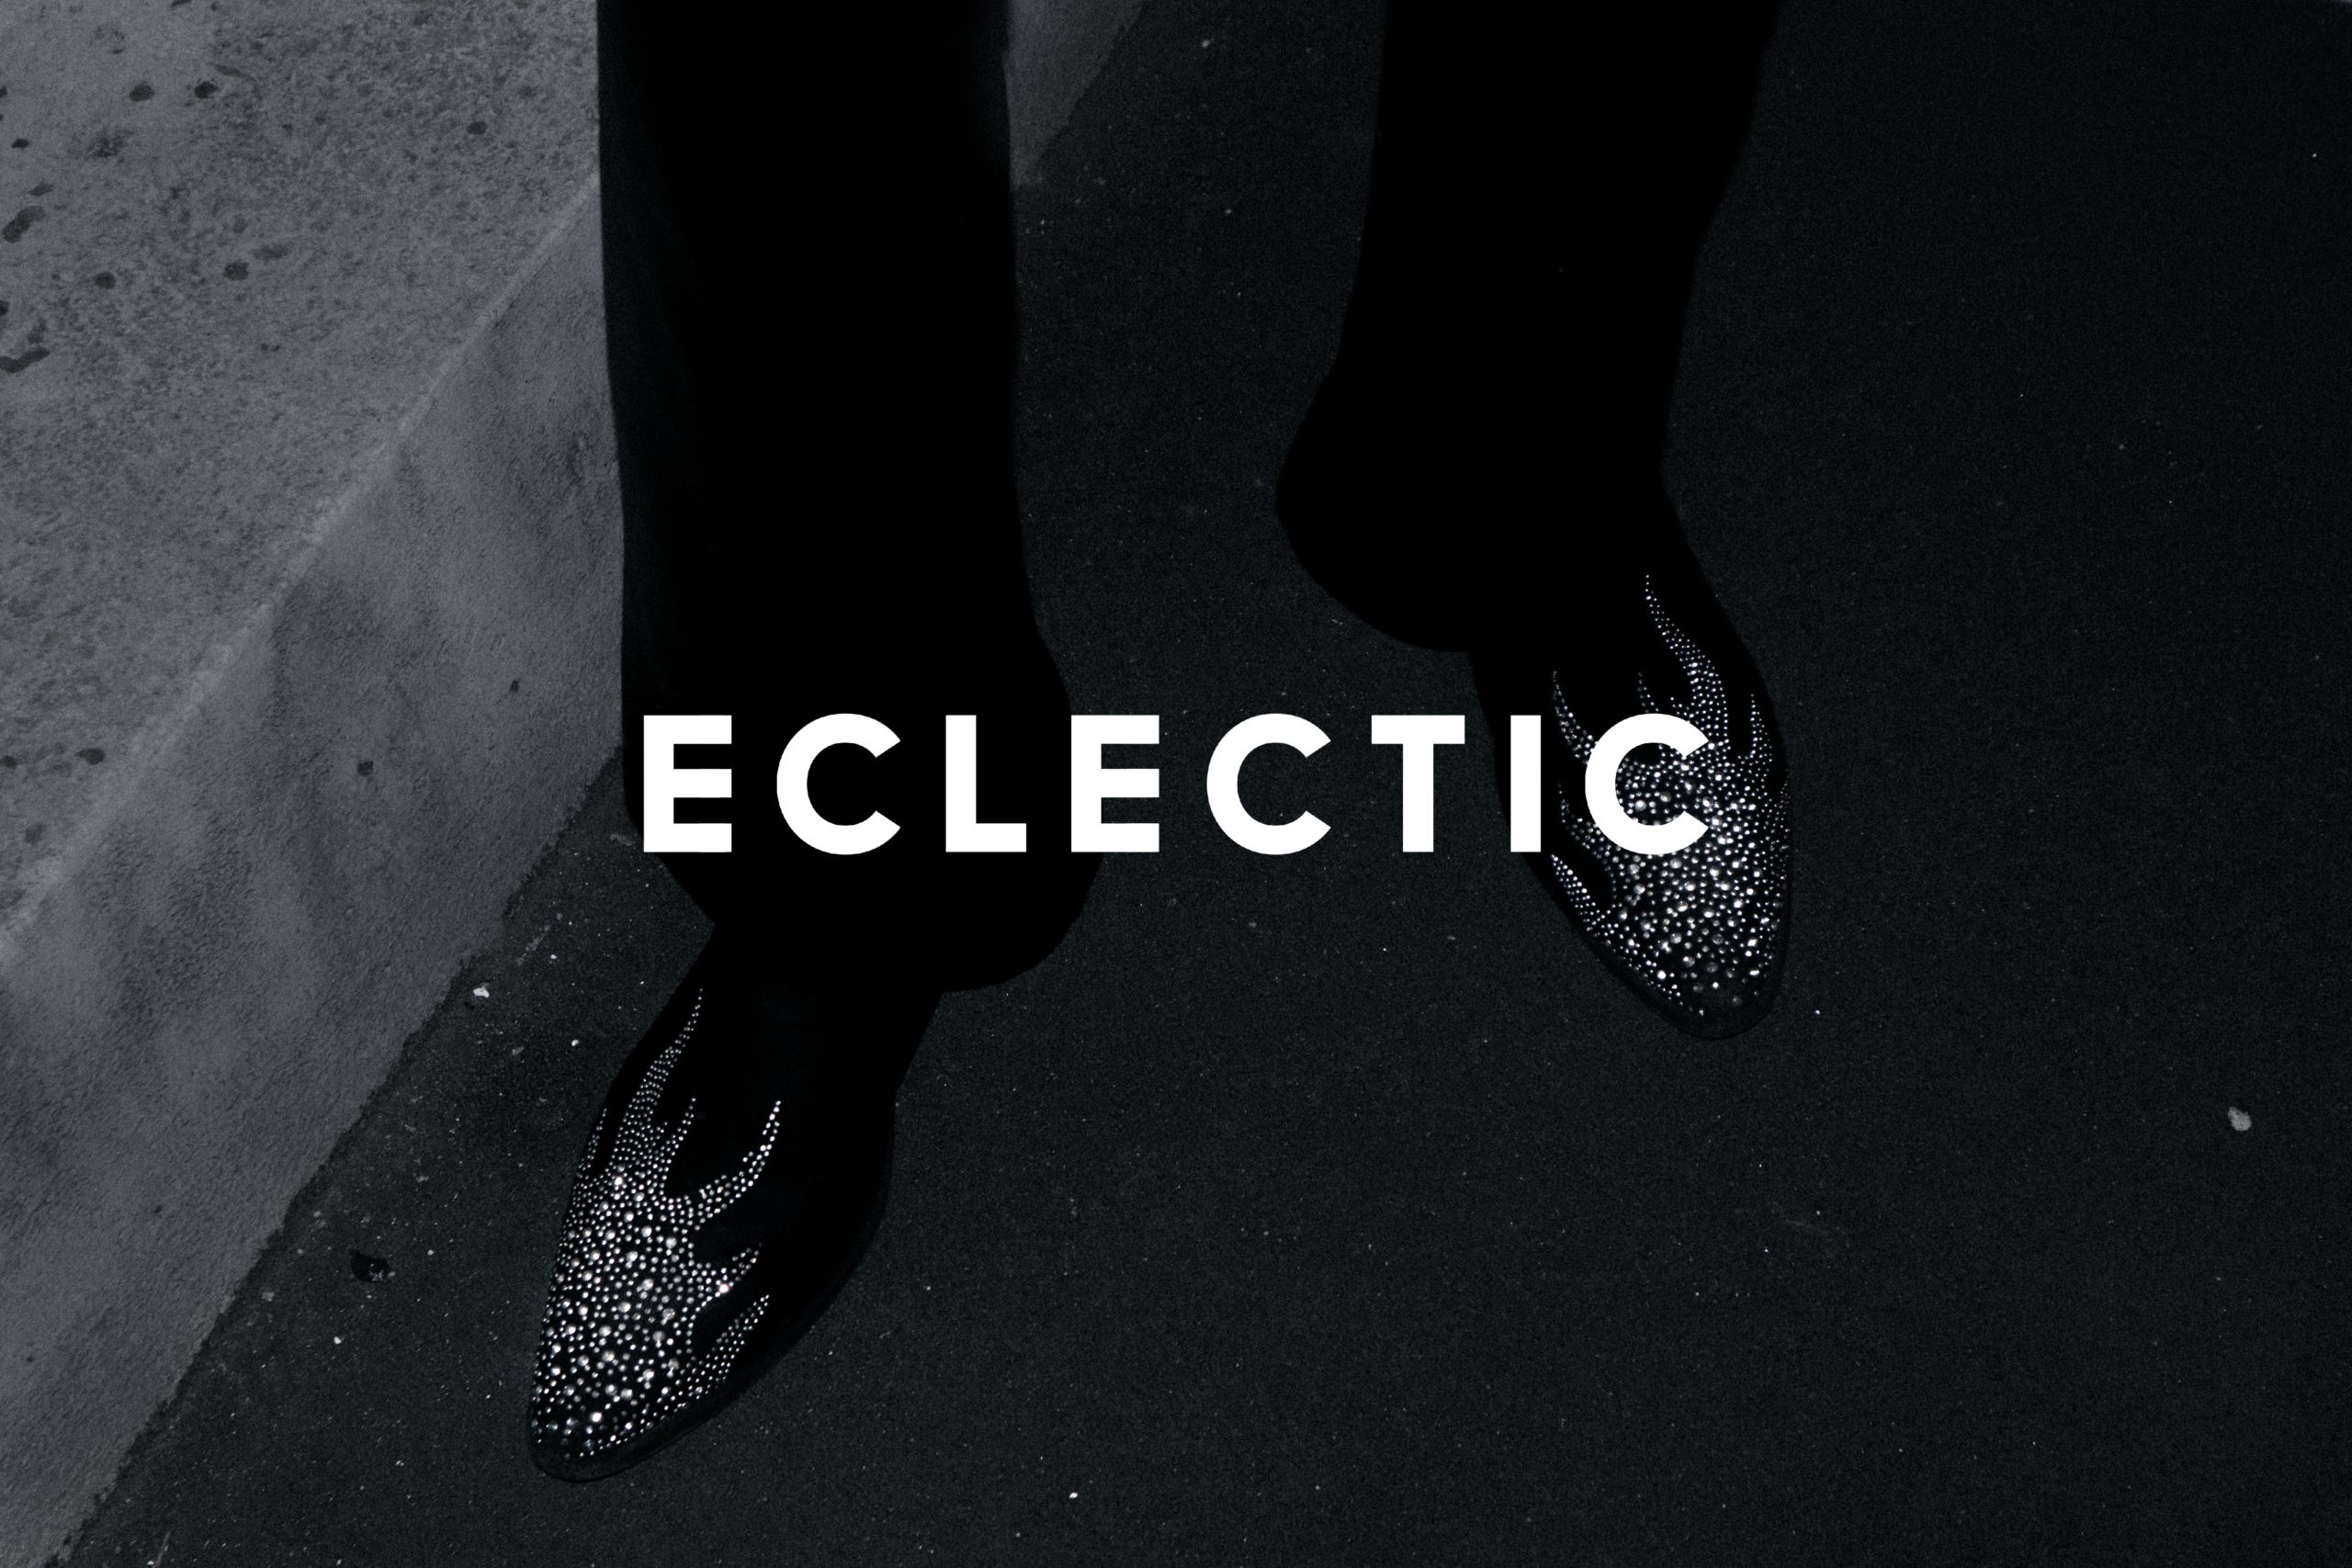 NORTHEAST BASED BRAND ECLECTIC RELEASES DEBUT SAMPLE COLLECTION